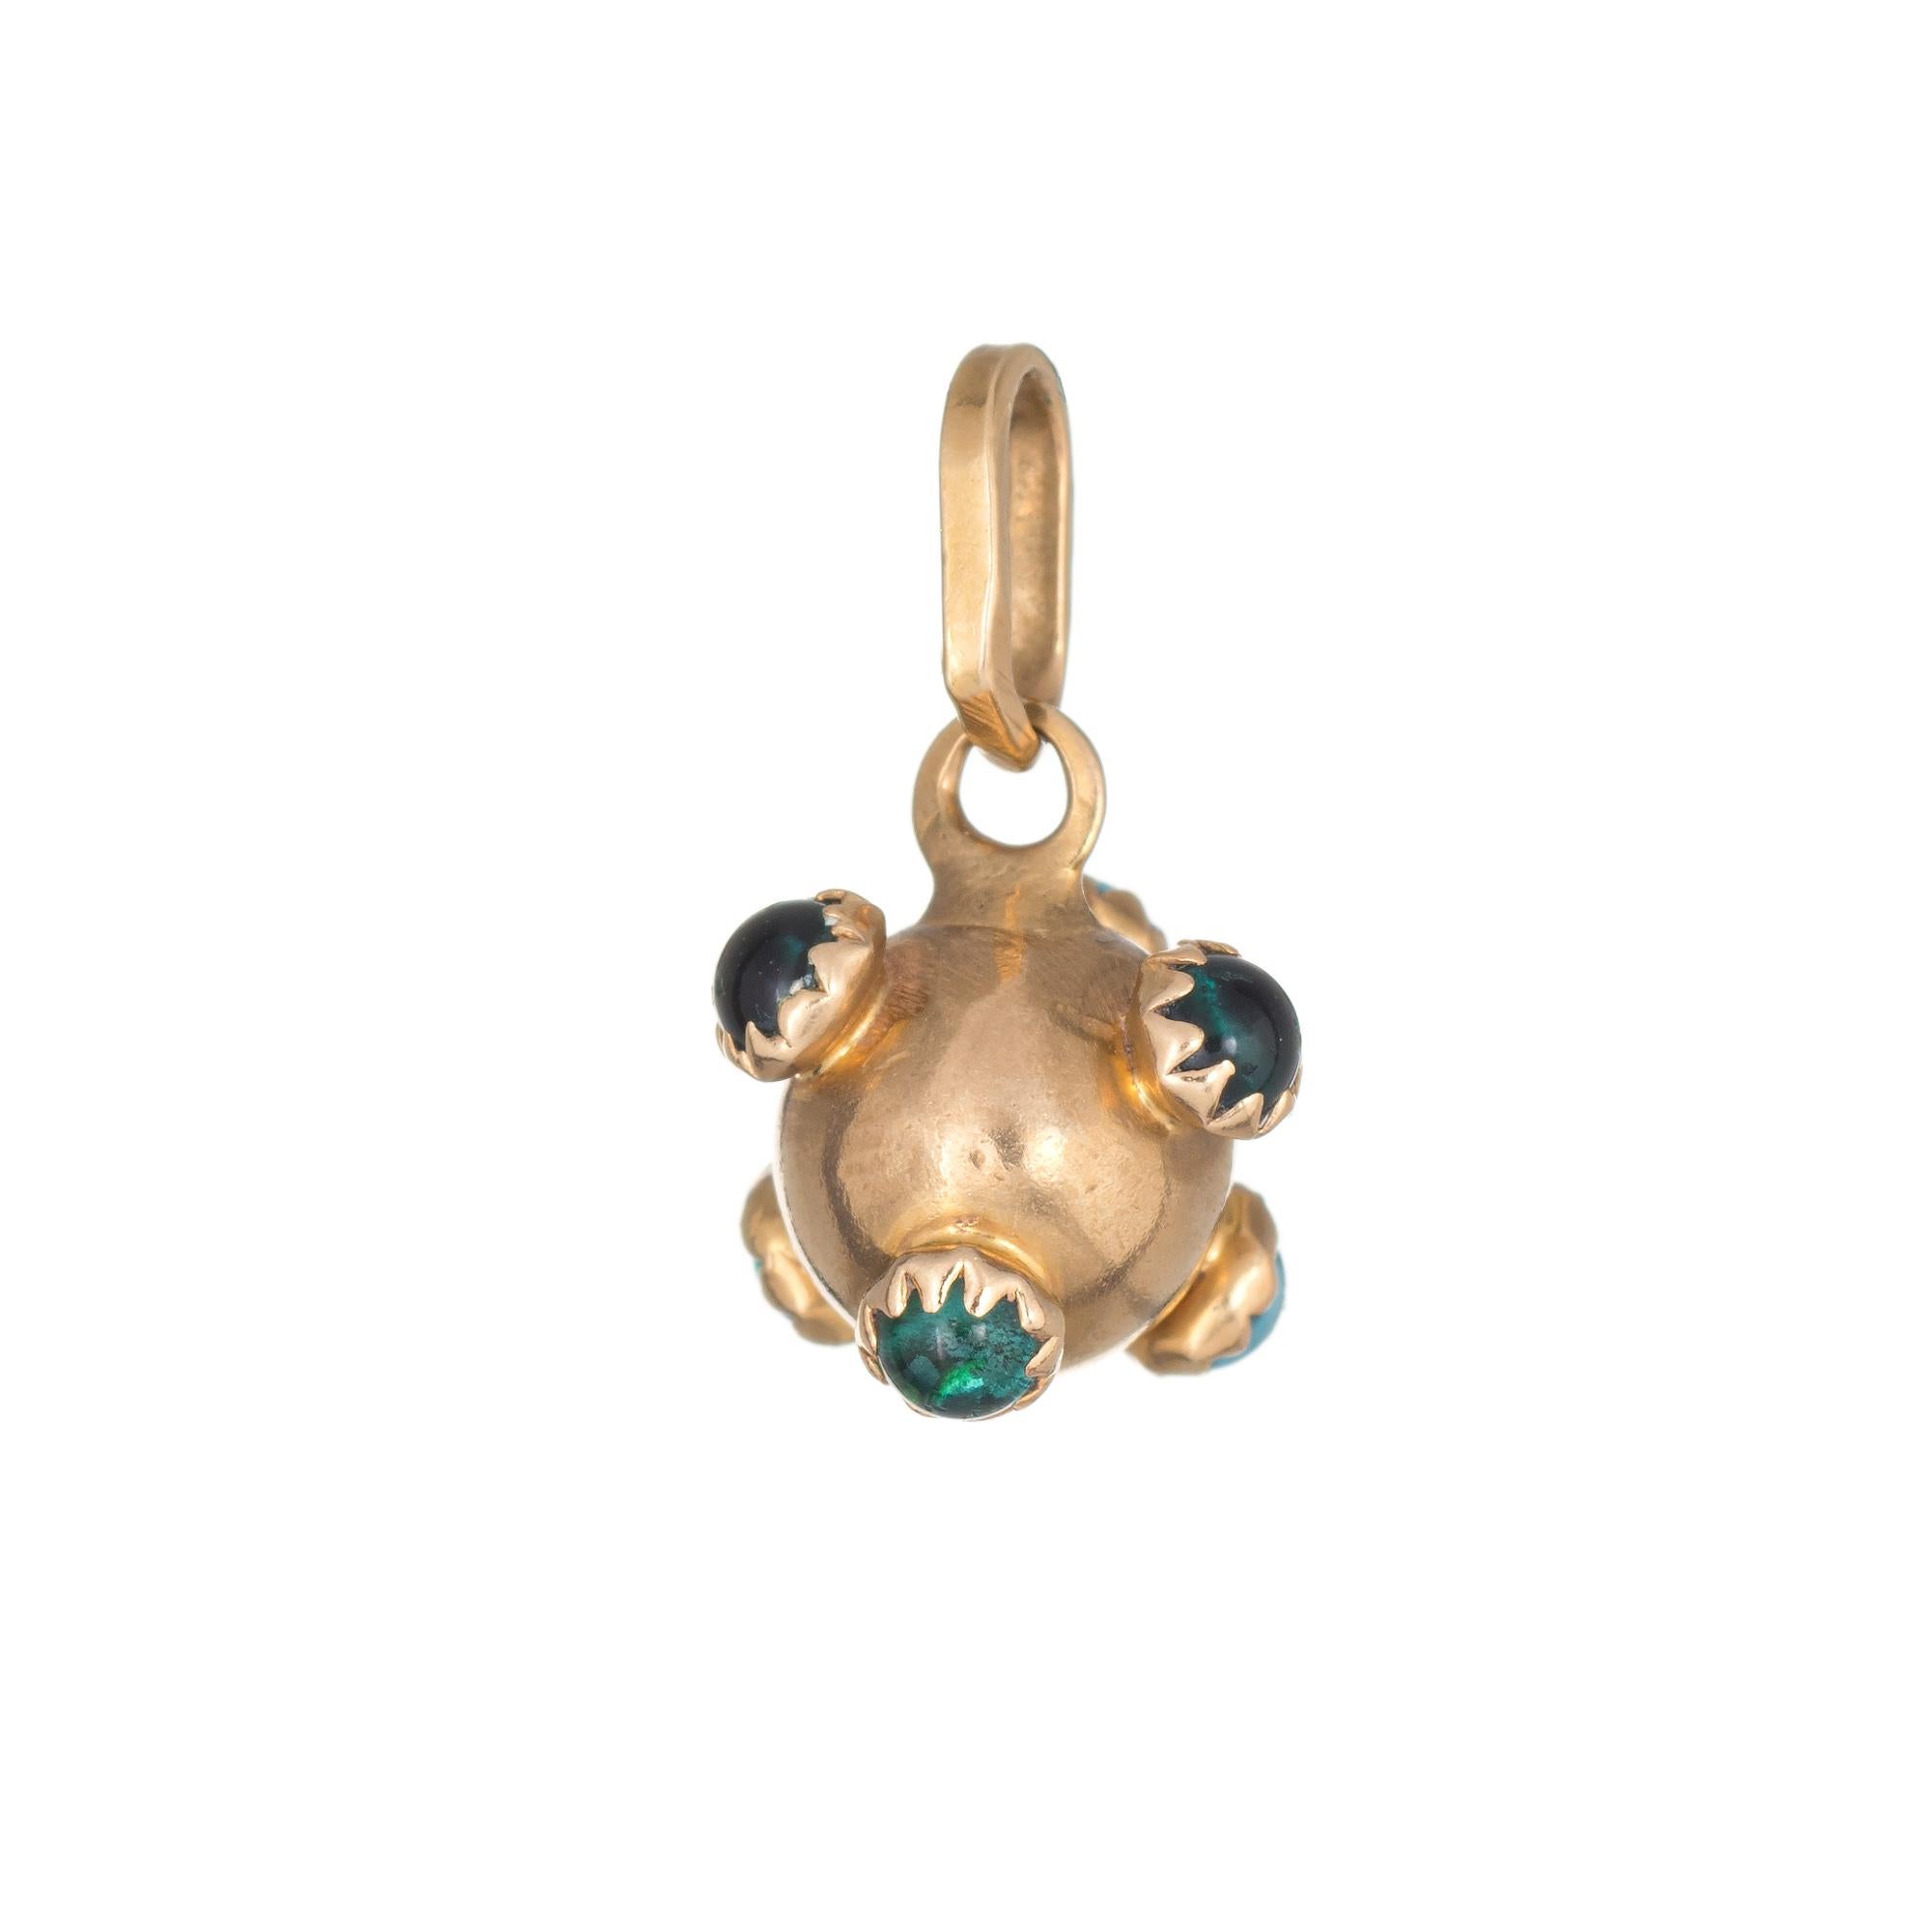 Ornate sputnik pendant (circa 1950s to 1960s) crafted in 18 karat yellow gold. 

Small 2mm green stones (synthetic) adorn the pendant. The stones are in excellent condition and free of cracks or chips.

The pendant measures 13mm (0.51 inches) and is